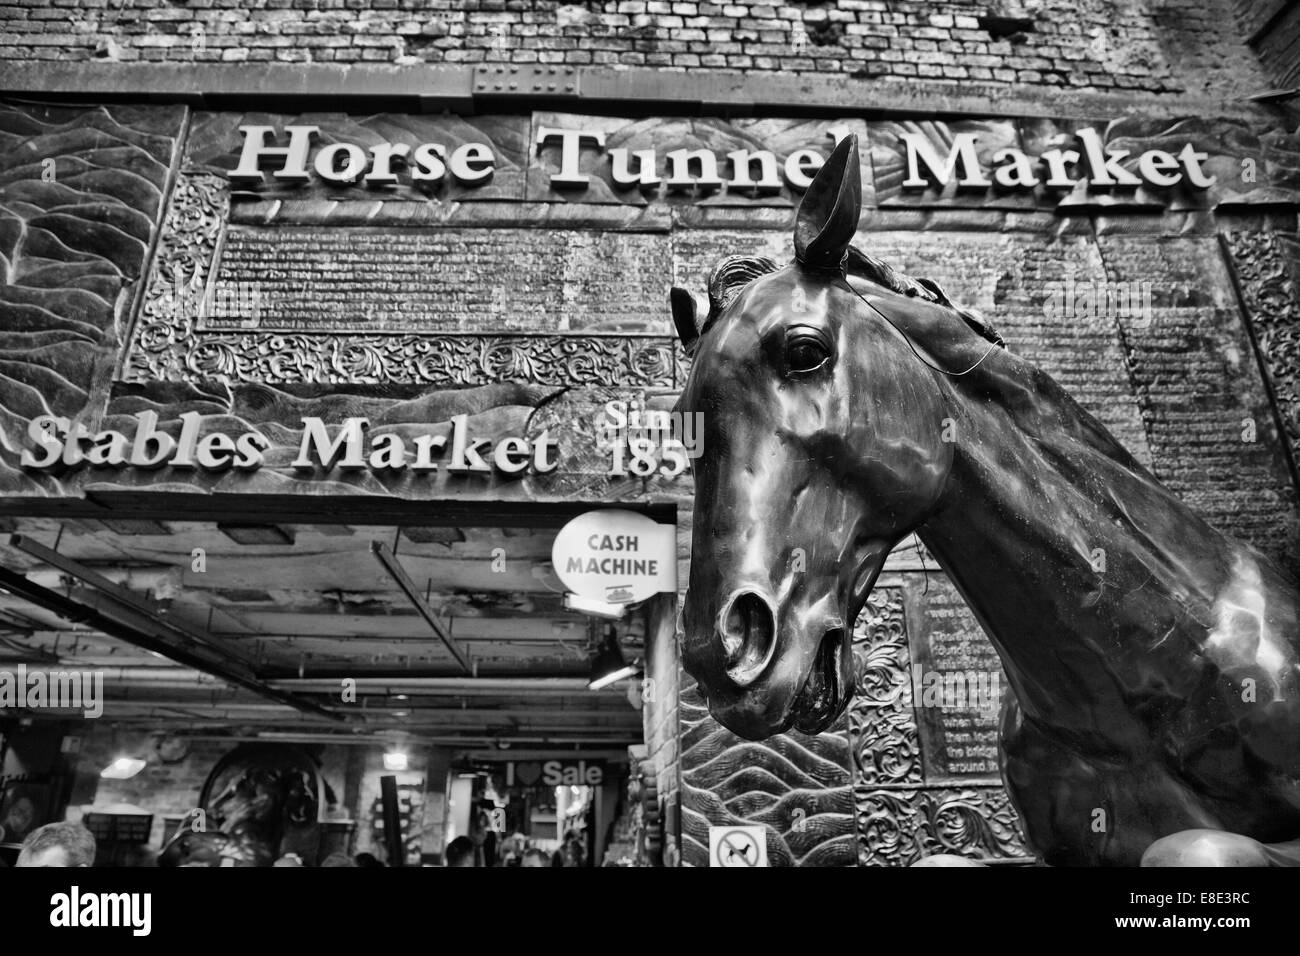 The Horse tunnel in Camden market Stock Photo